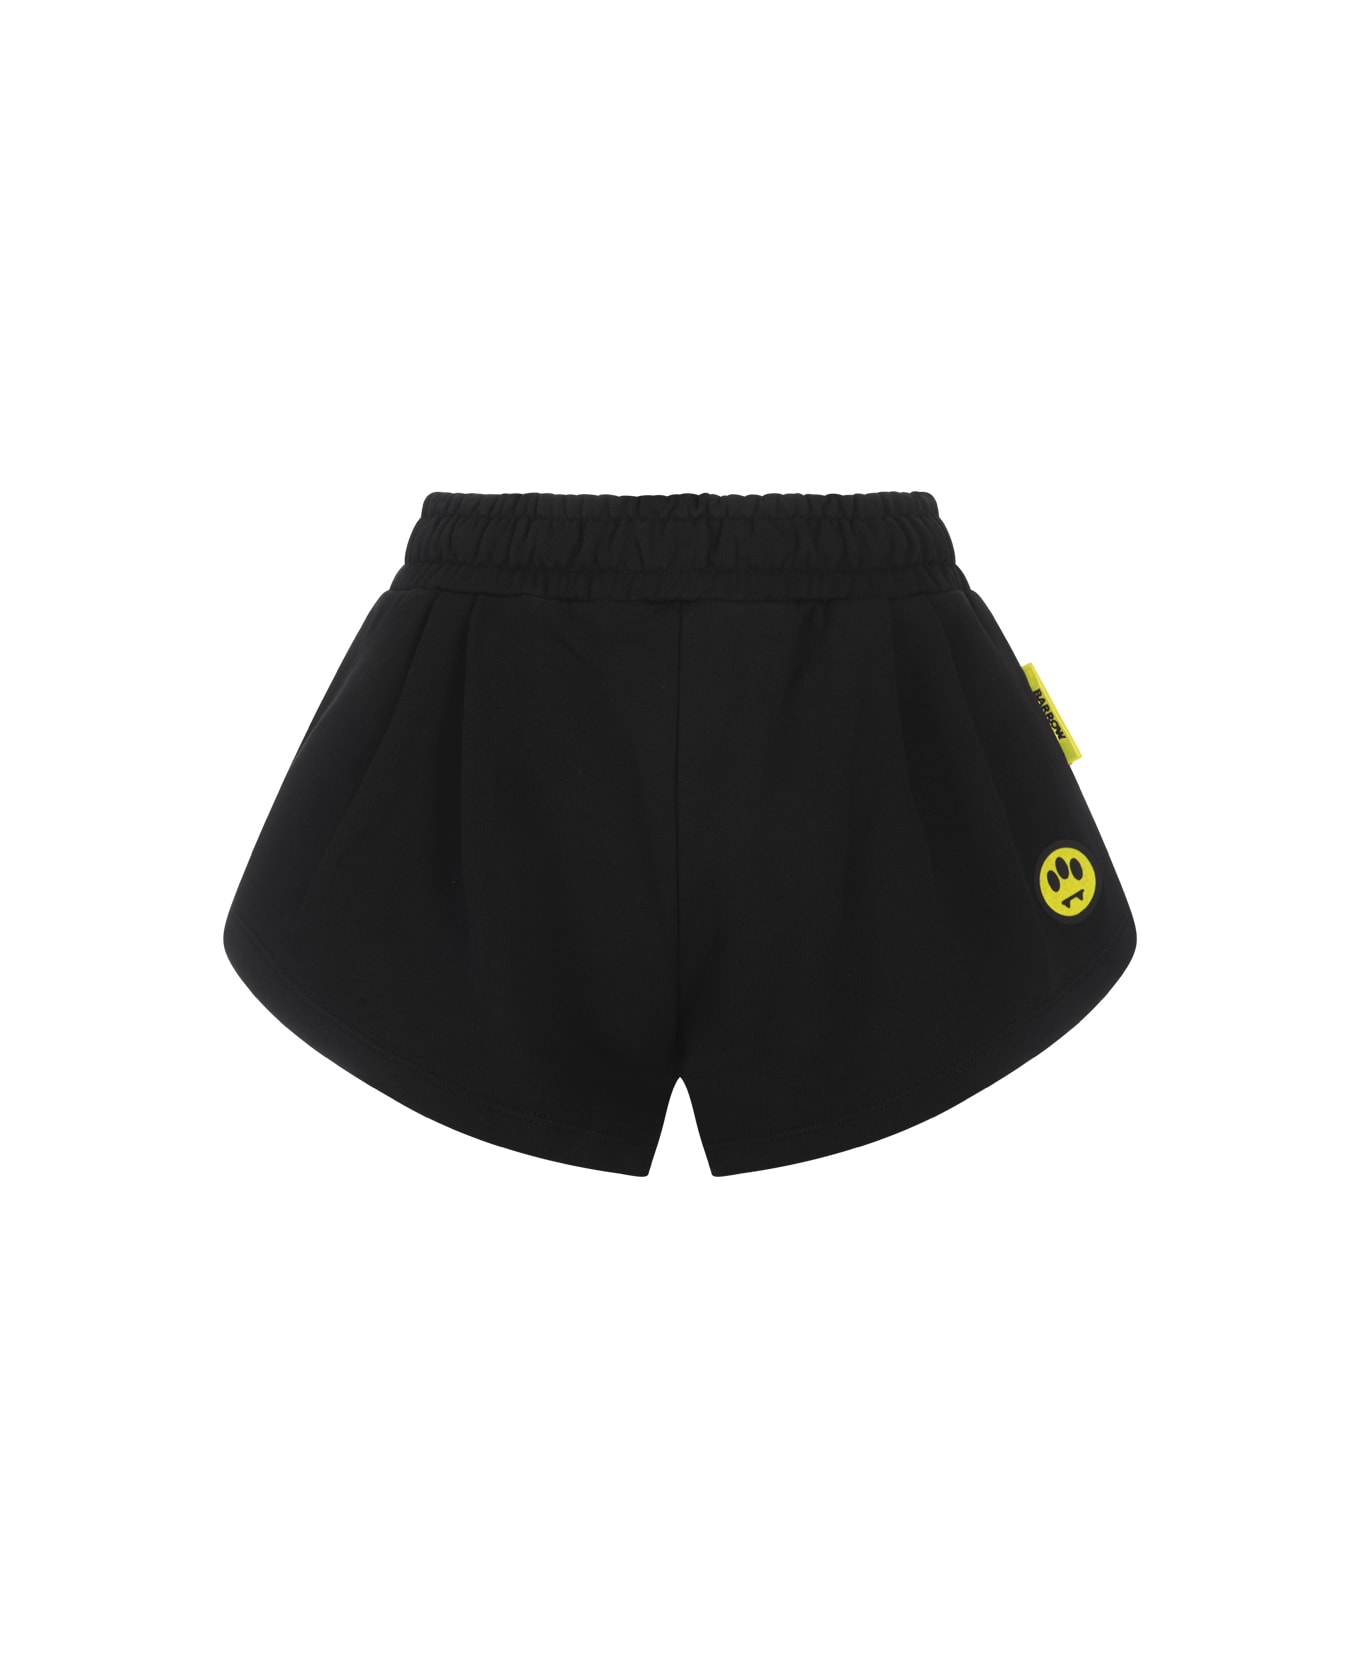 Barrow Black Crop Shorts With Smile Patch - Nero ショートパンツ